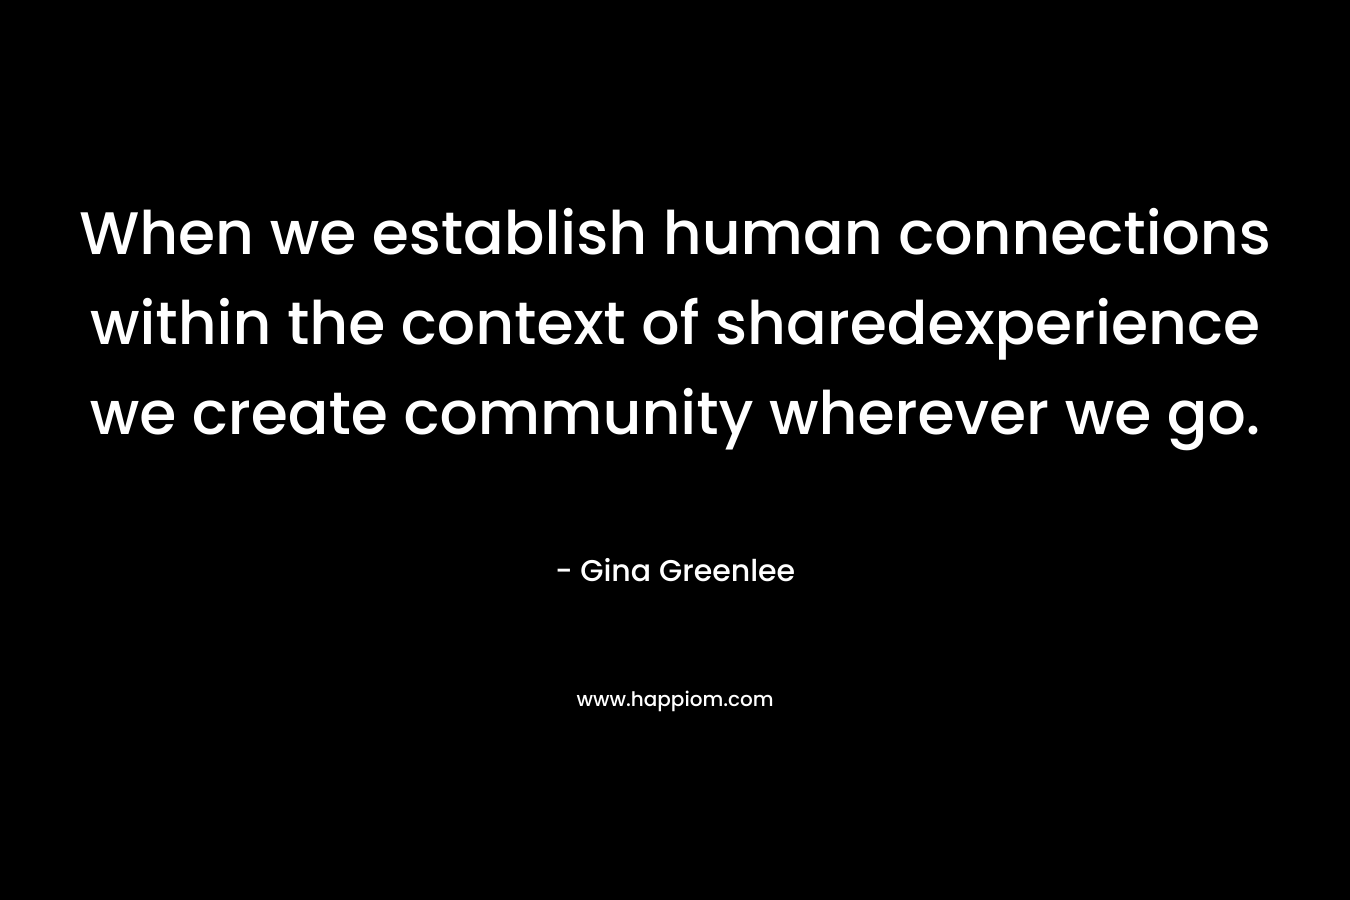 When we establish human connections within the context of sharedexperience we create community wherever we go. – Gina Greenlee